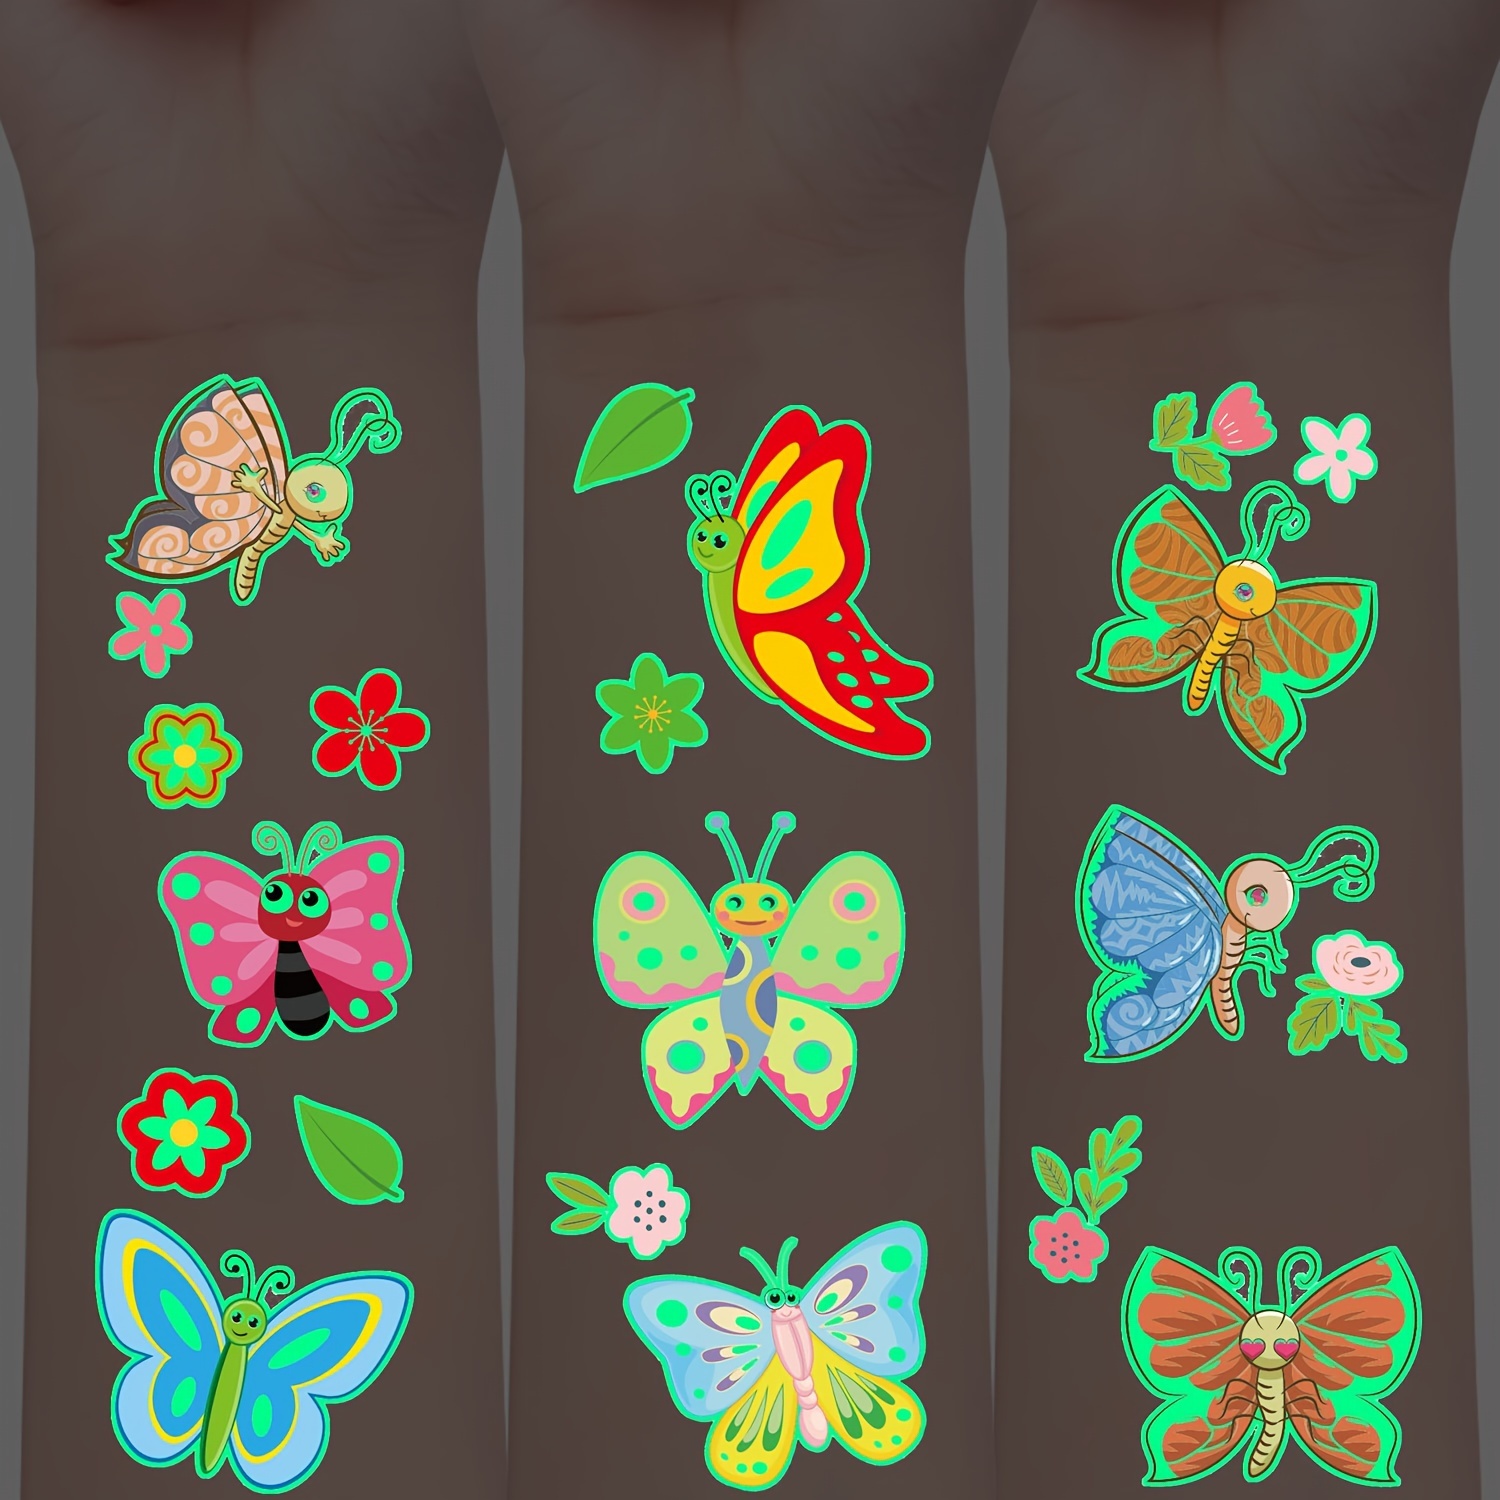 

Glow In The Dark Butterfly Temporary Tattoos - 10 Sheets, 120 Multicolor Cartoon Insect Designs, Waterproof Body Arm Fake Tattoo Stickers, Lasts 2-5 Days, Ideal For Birthday Party Favors